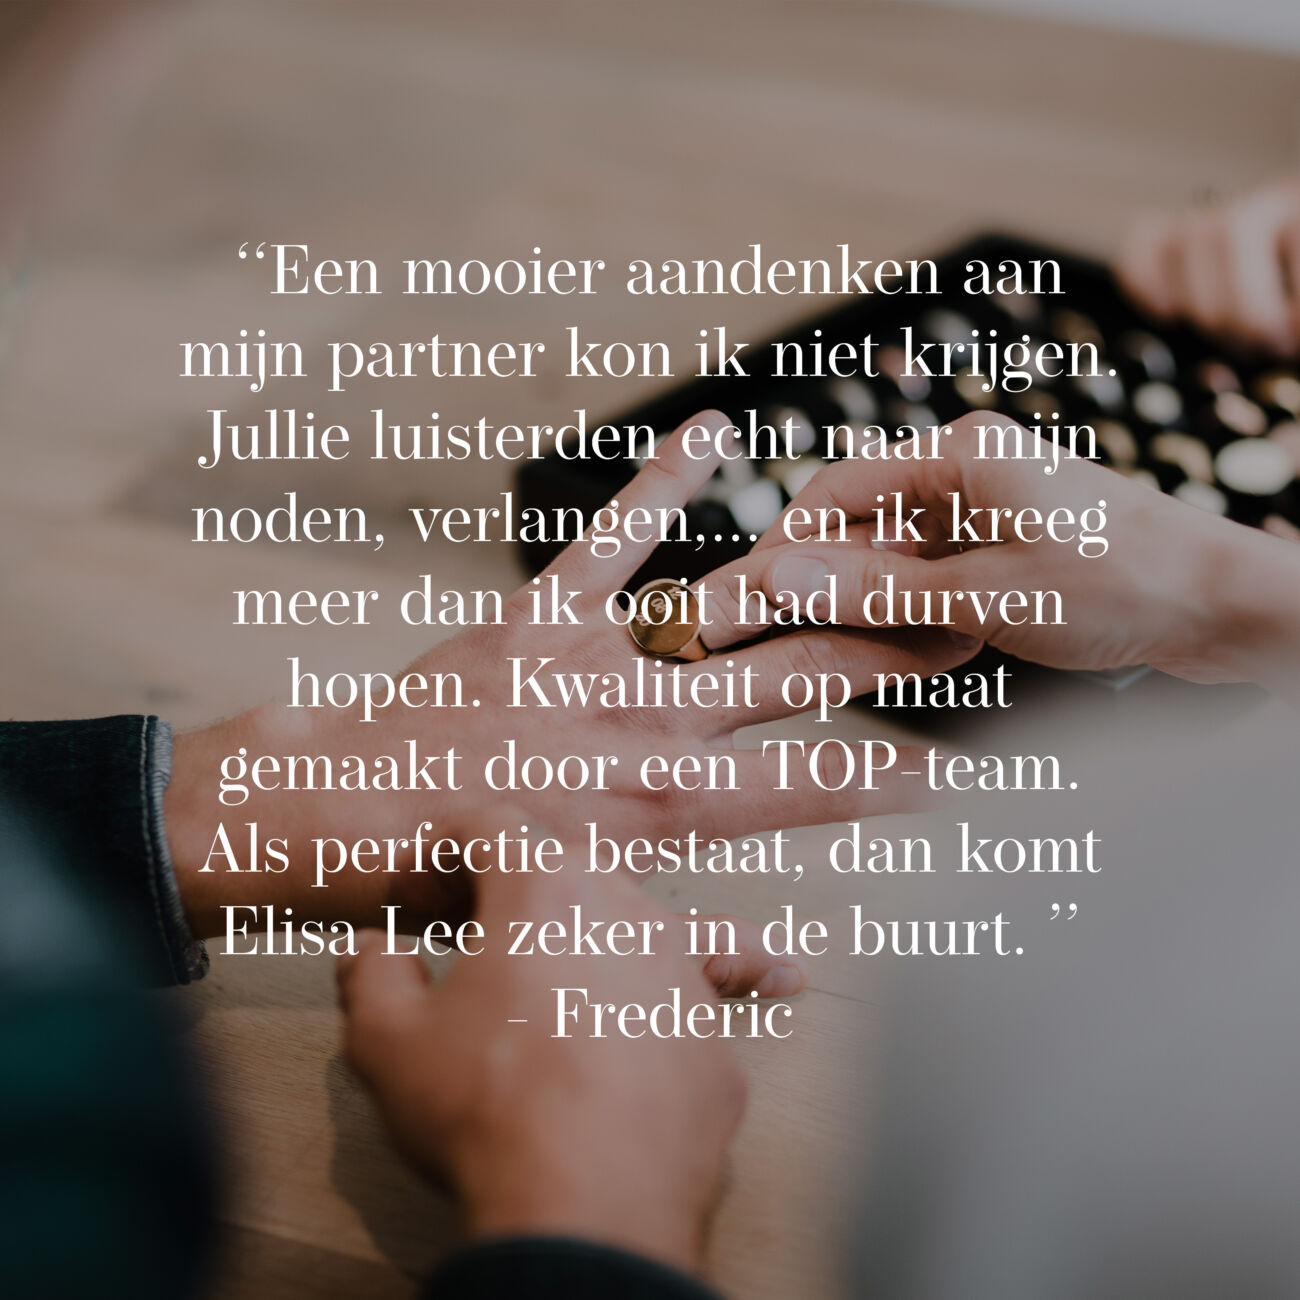 Review Frederic Monsieur